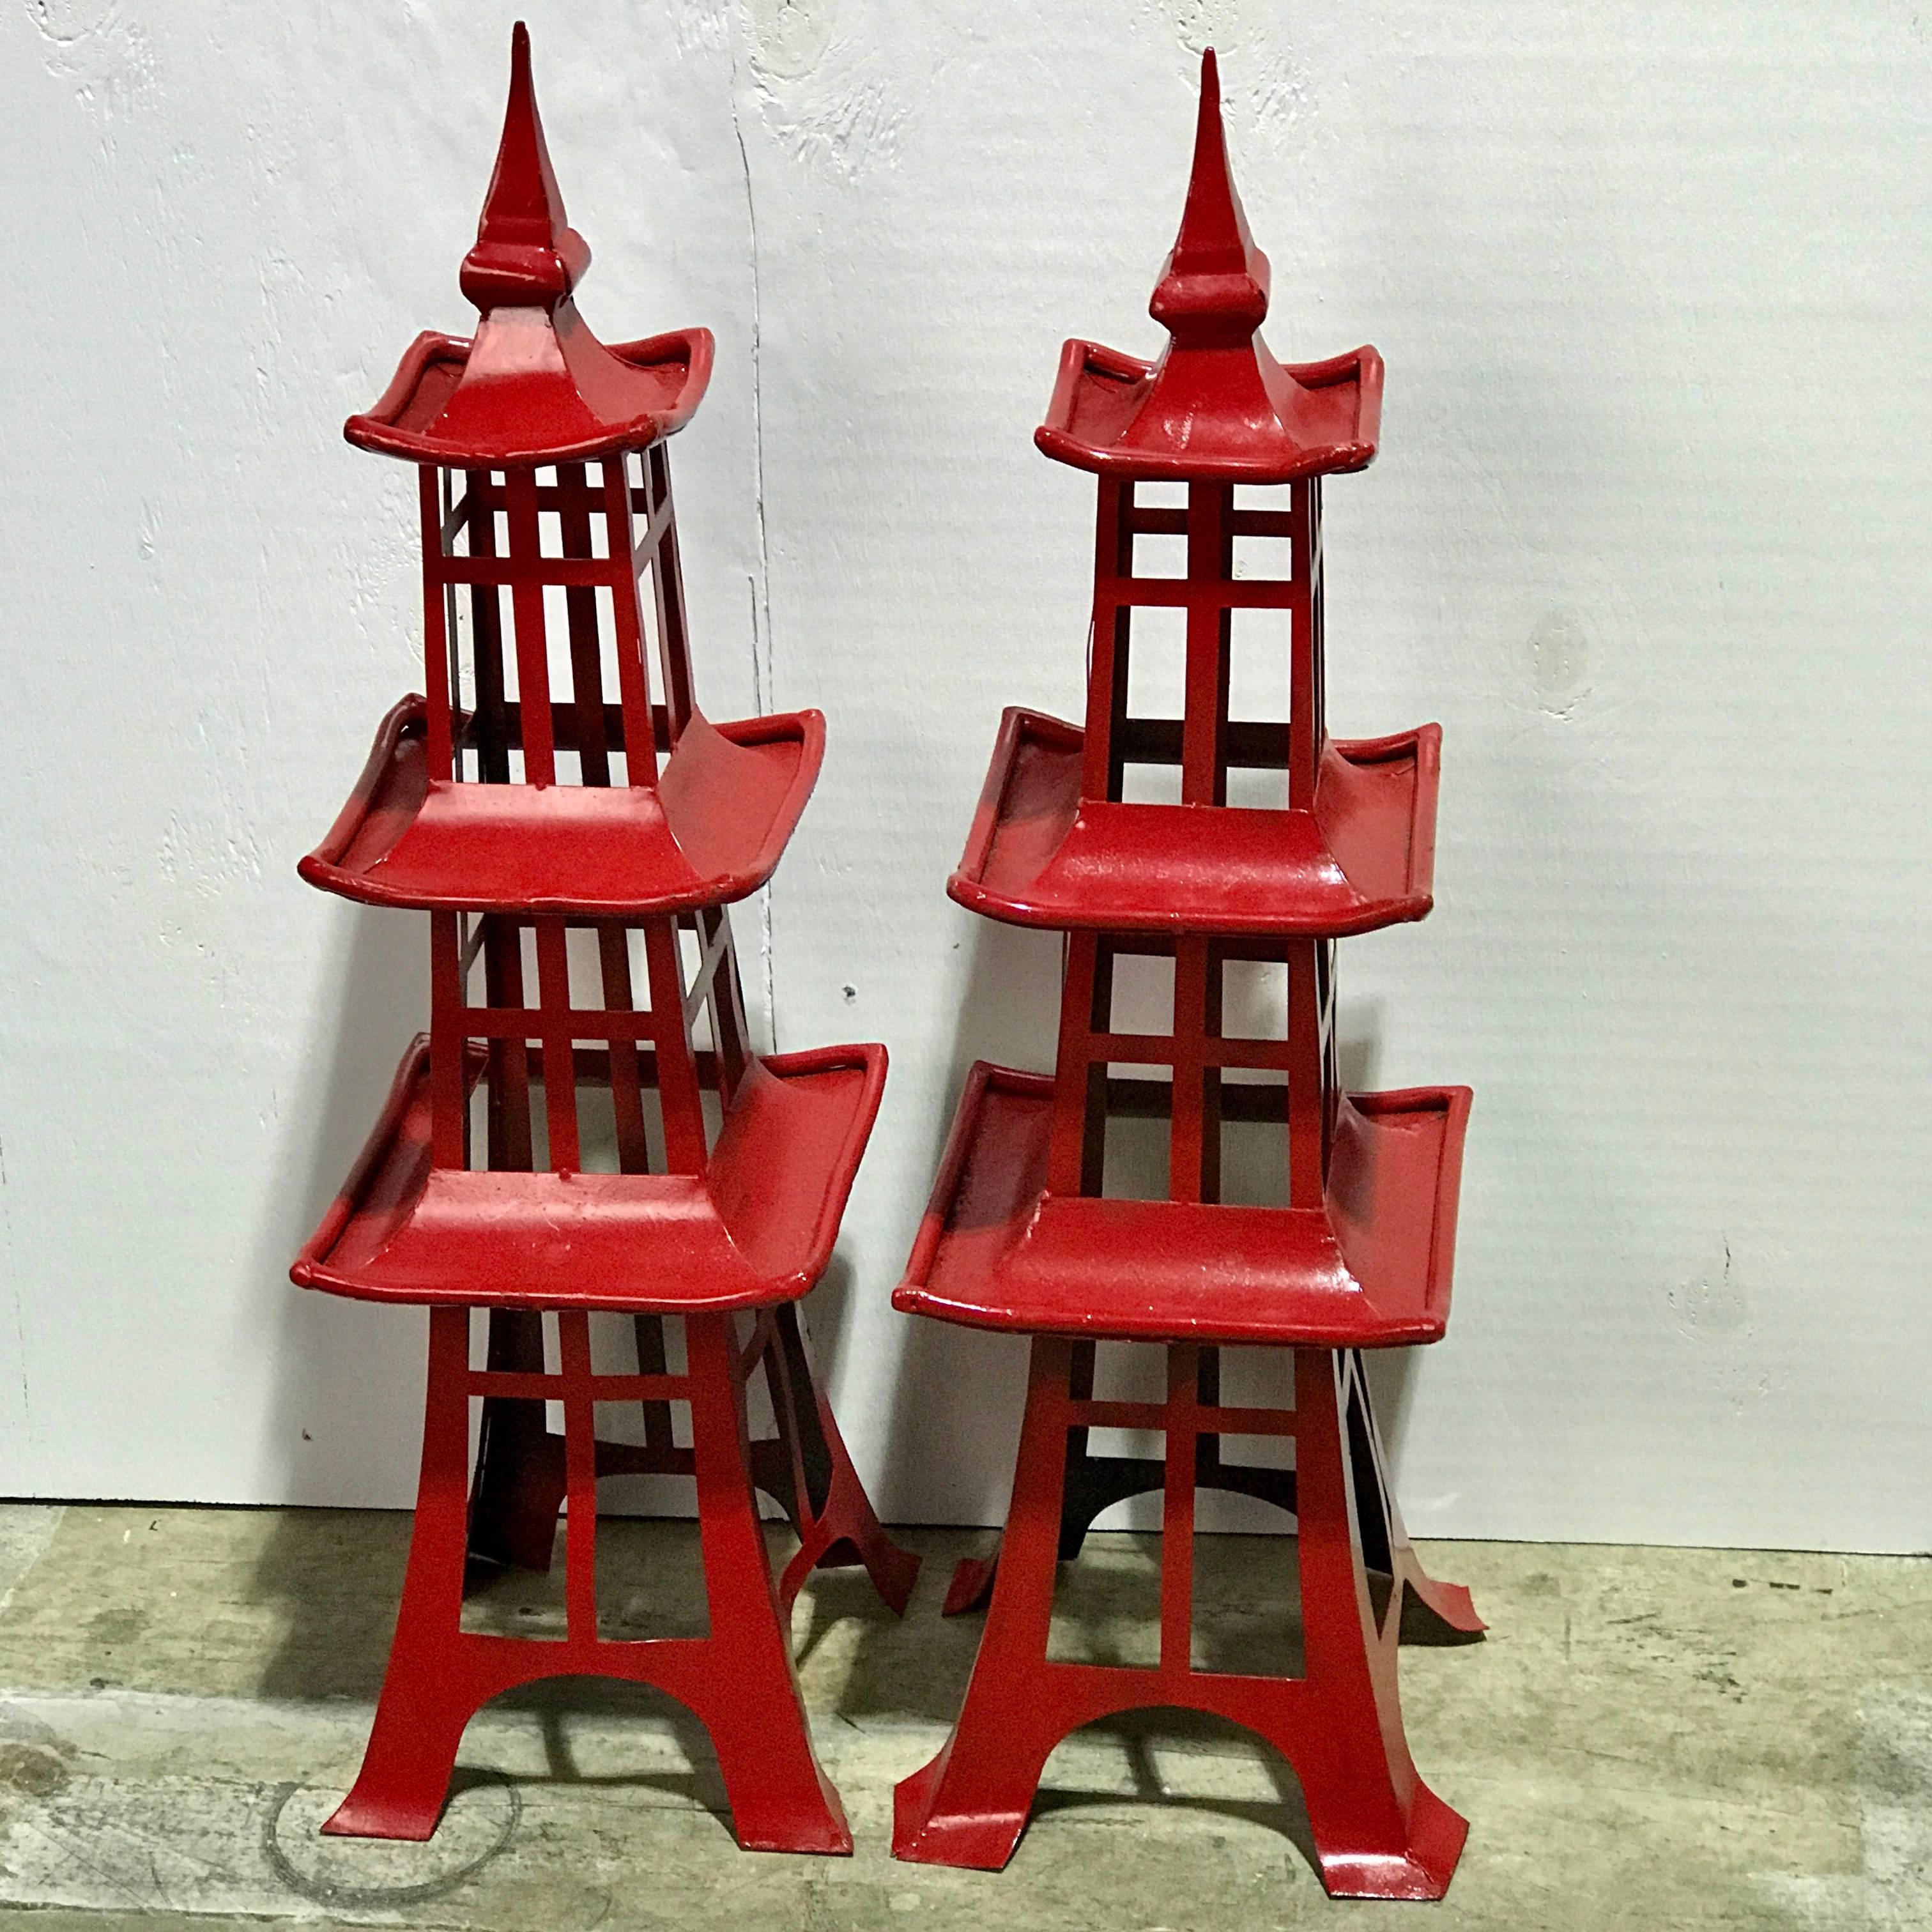 Pair of midcentury red enameled metal Japanese pagodas, from Walt Disney World. Each one a architectural model, with red enameled tiered pierced bodies.